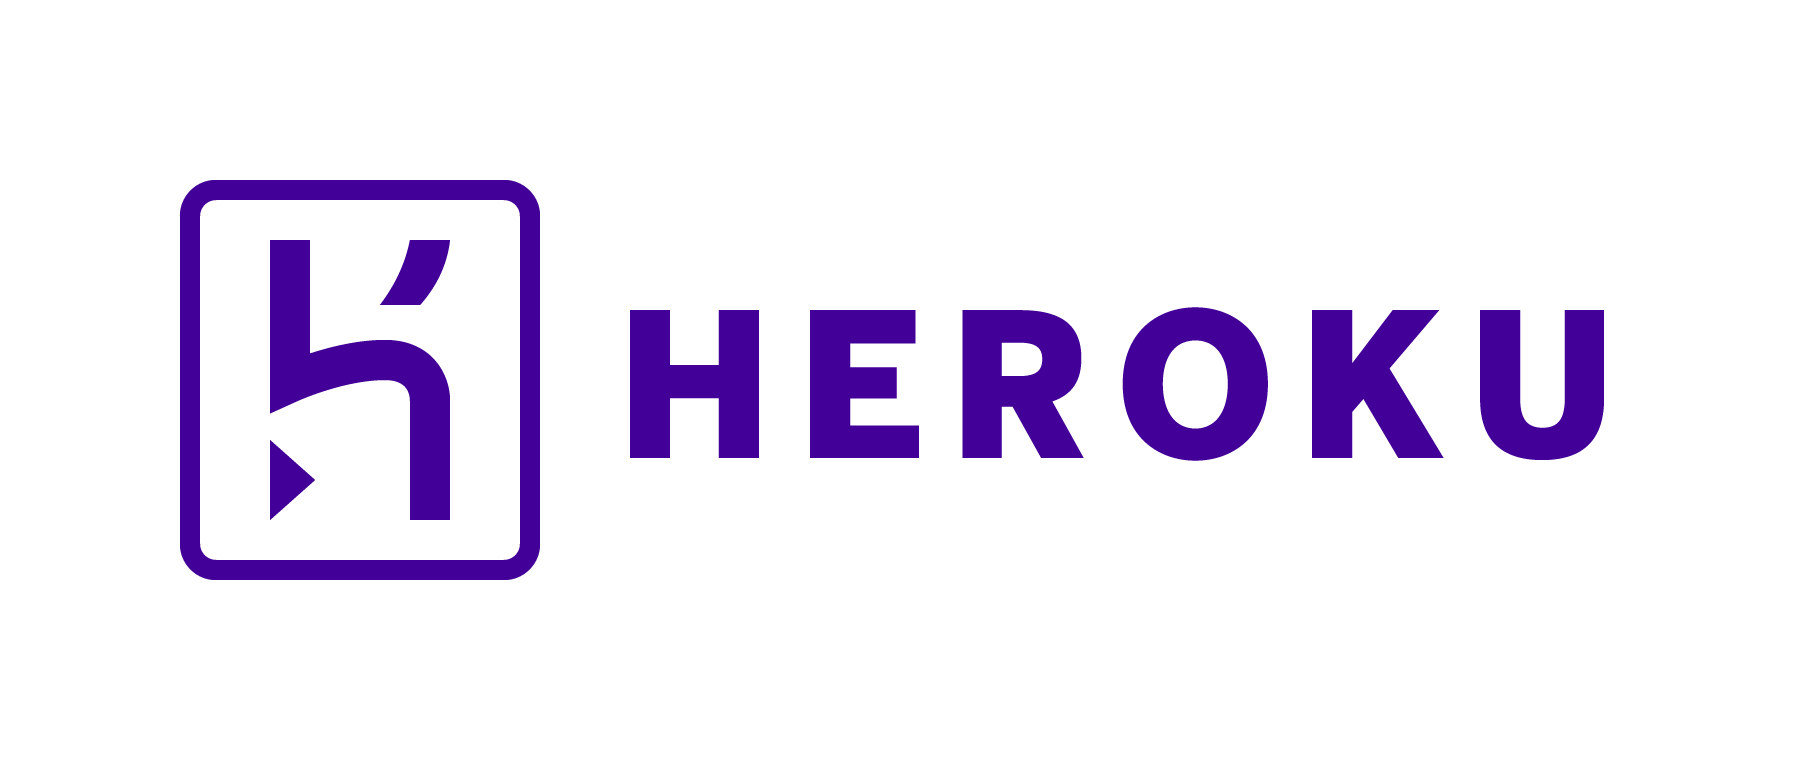 Deploy your Ember project to Heroku from Github - Philip Mutua ...